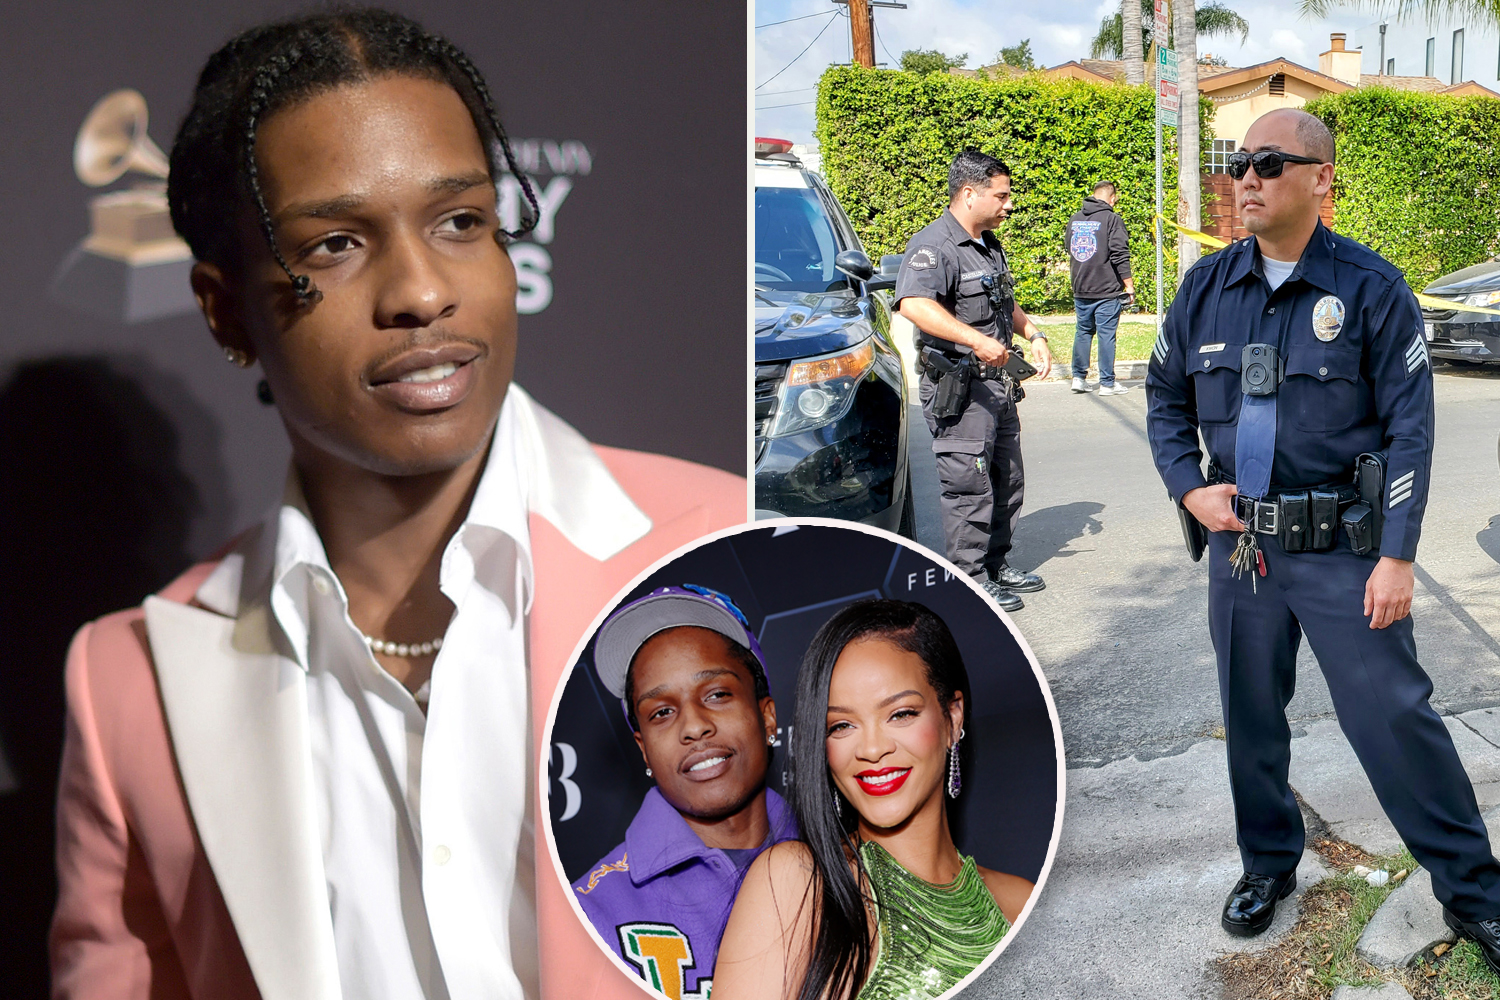 ”pregnant-rihannas-boyfriend-decides-to-move-out-of-house-raided-by-police”